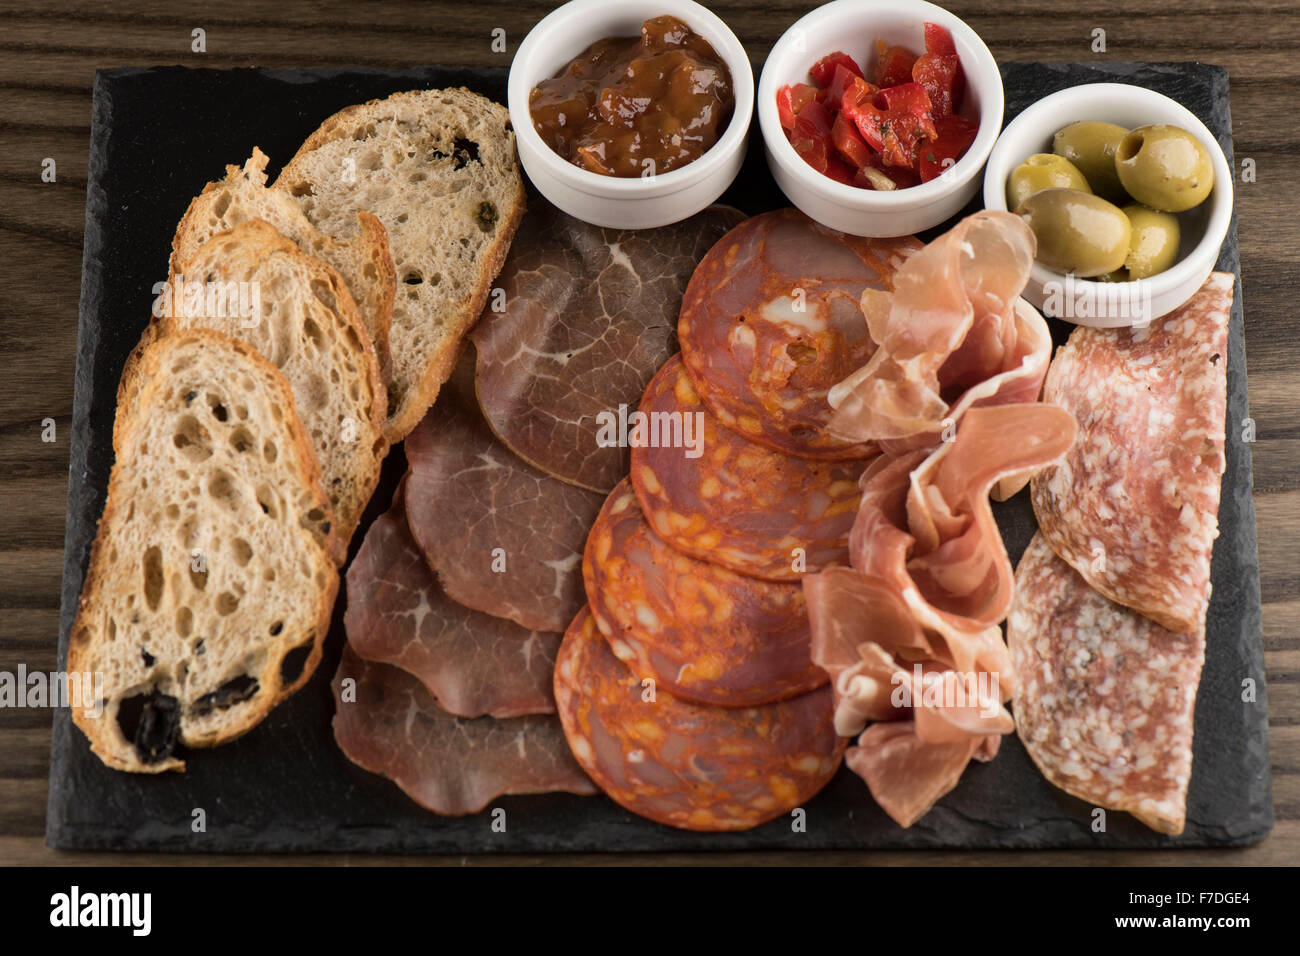 Italian cured meats with chutney, olives and chili served as a starter in a Italian restaurant. Stock Photo